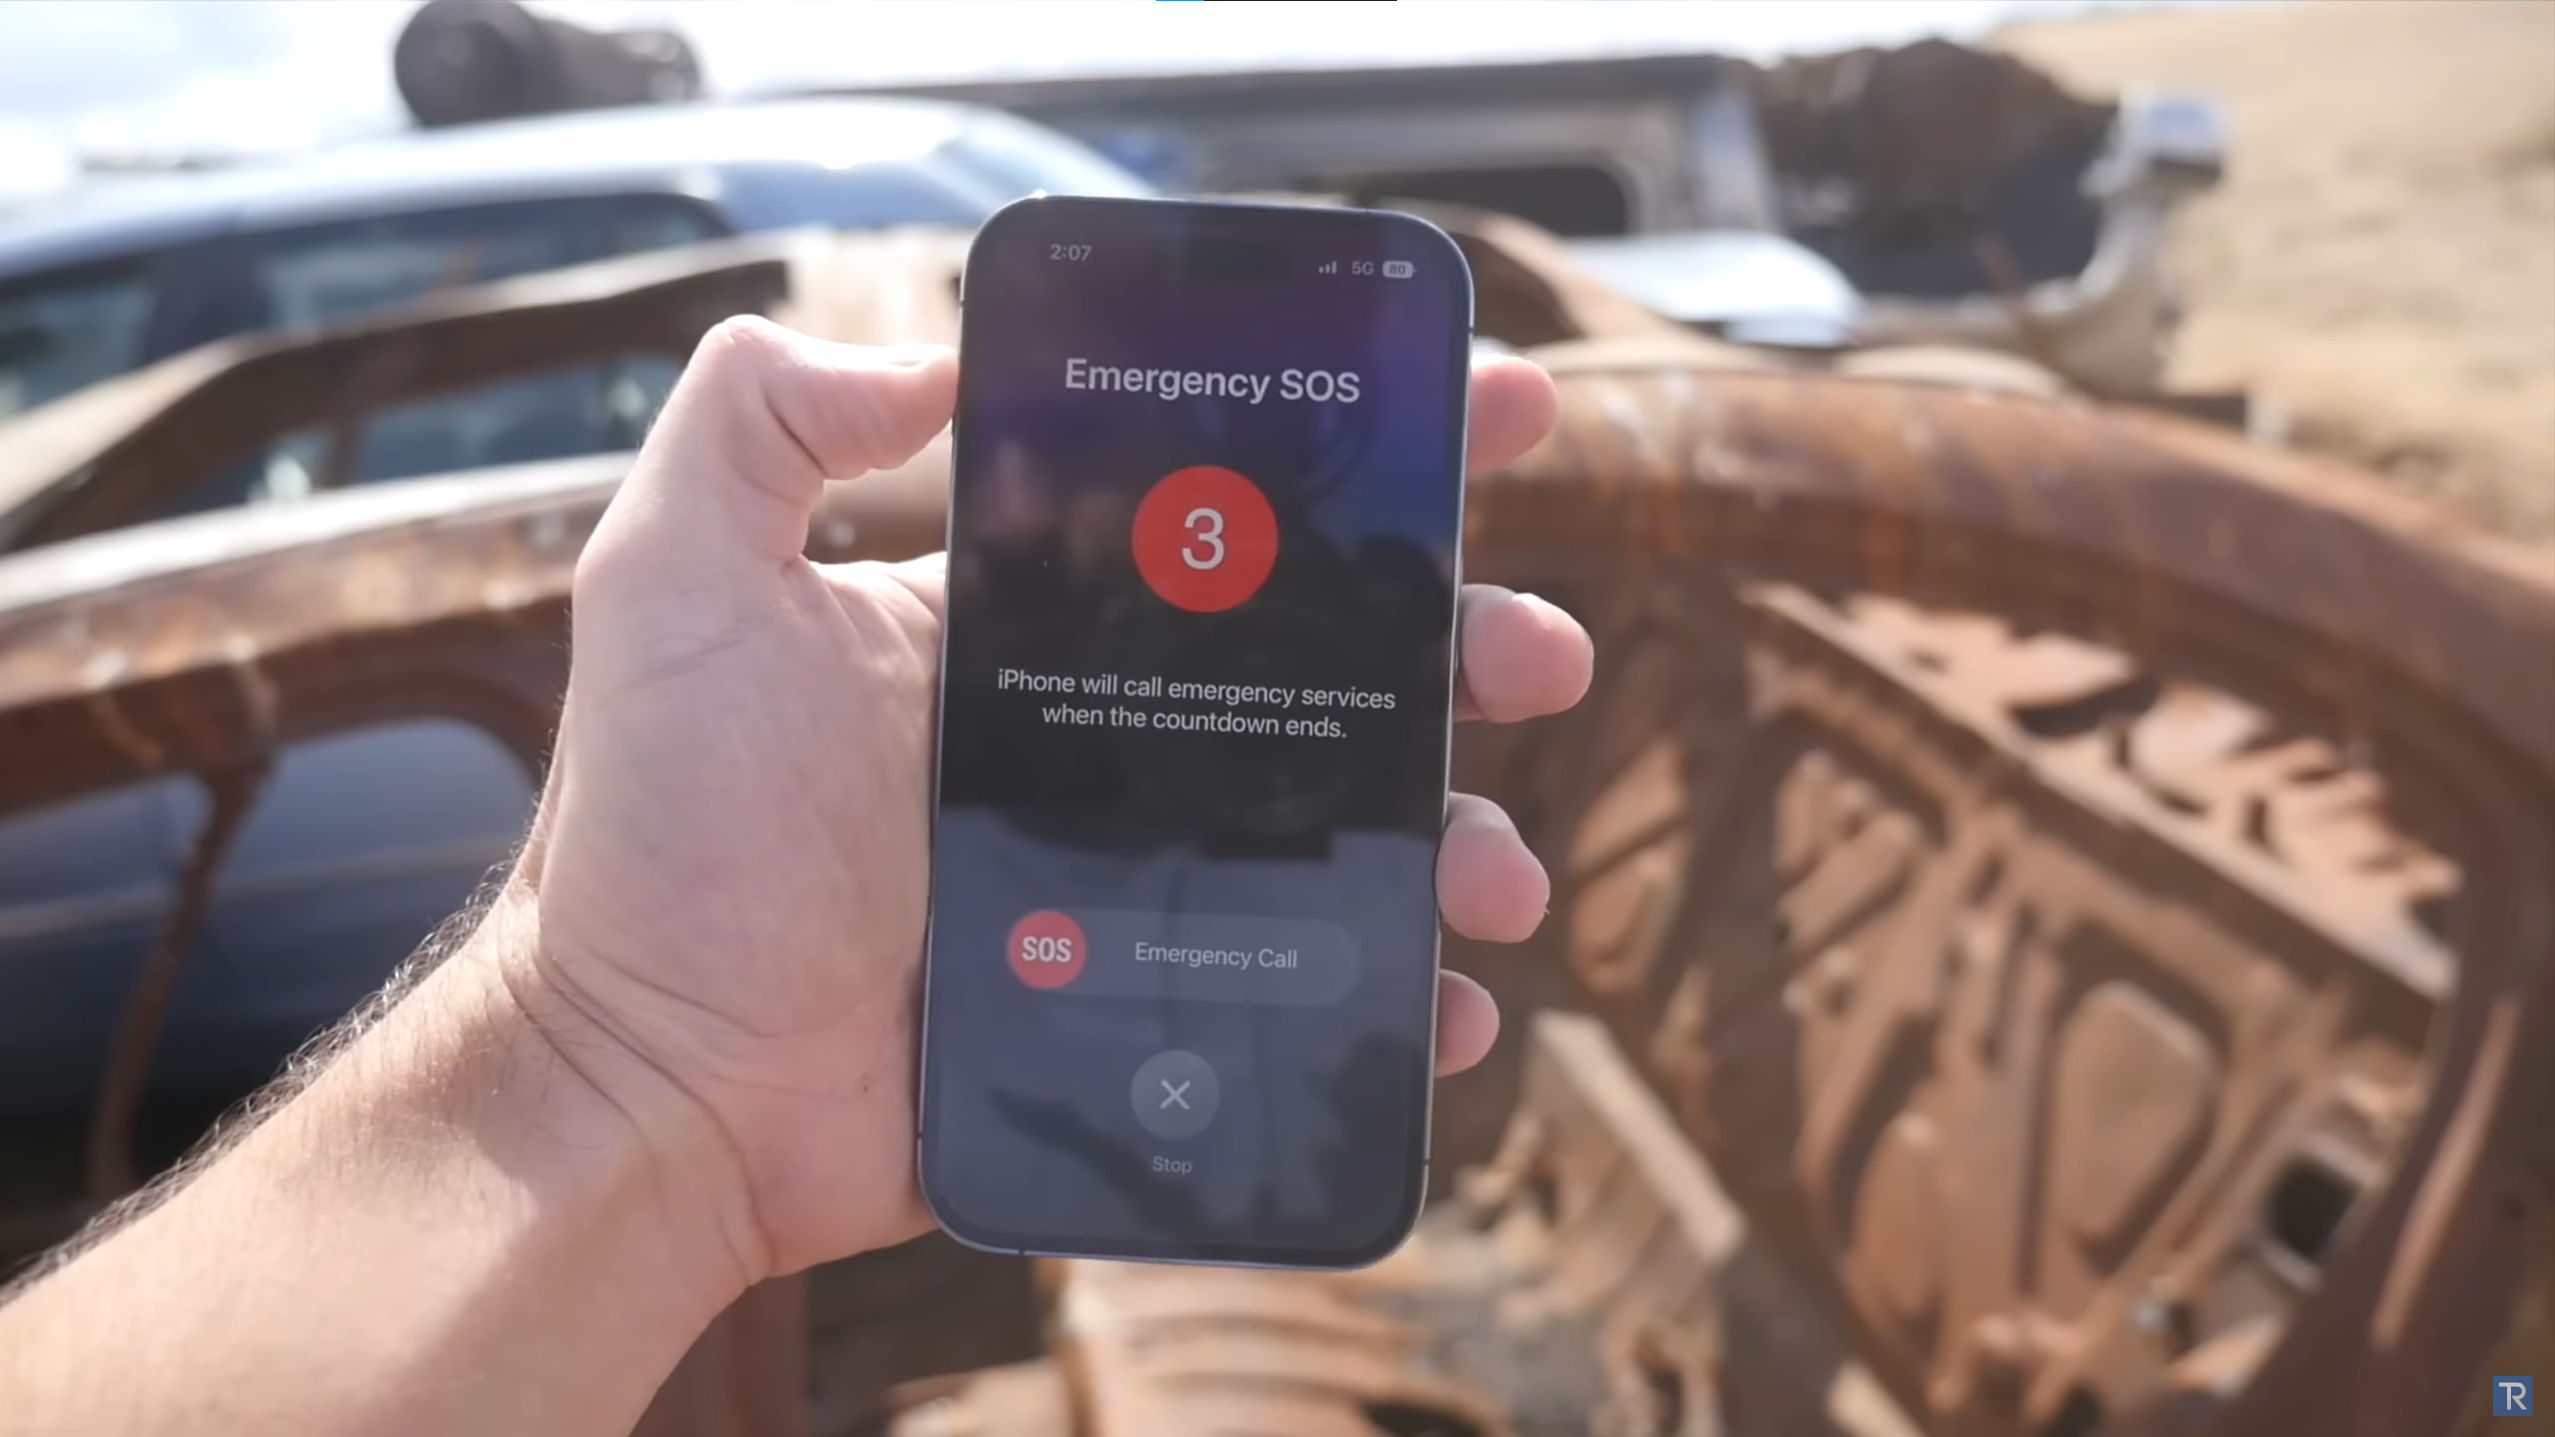 An image of an iPhone 14 Pro displaying an Emergency SOS notification after a simulated car crash